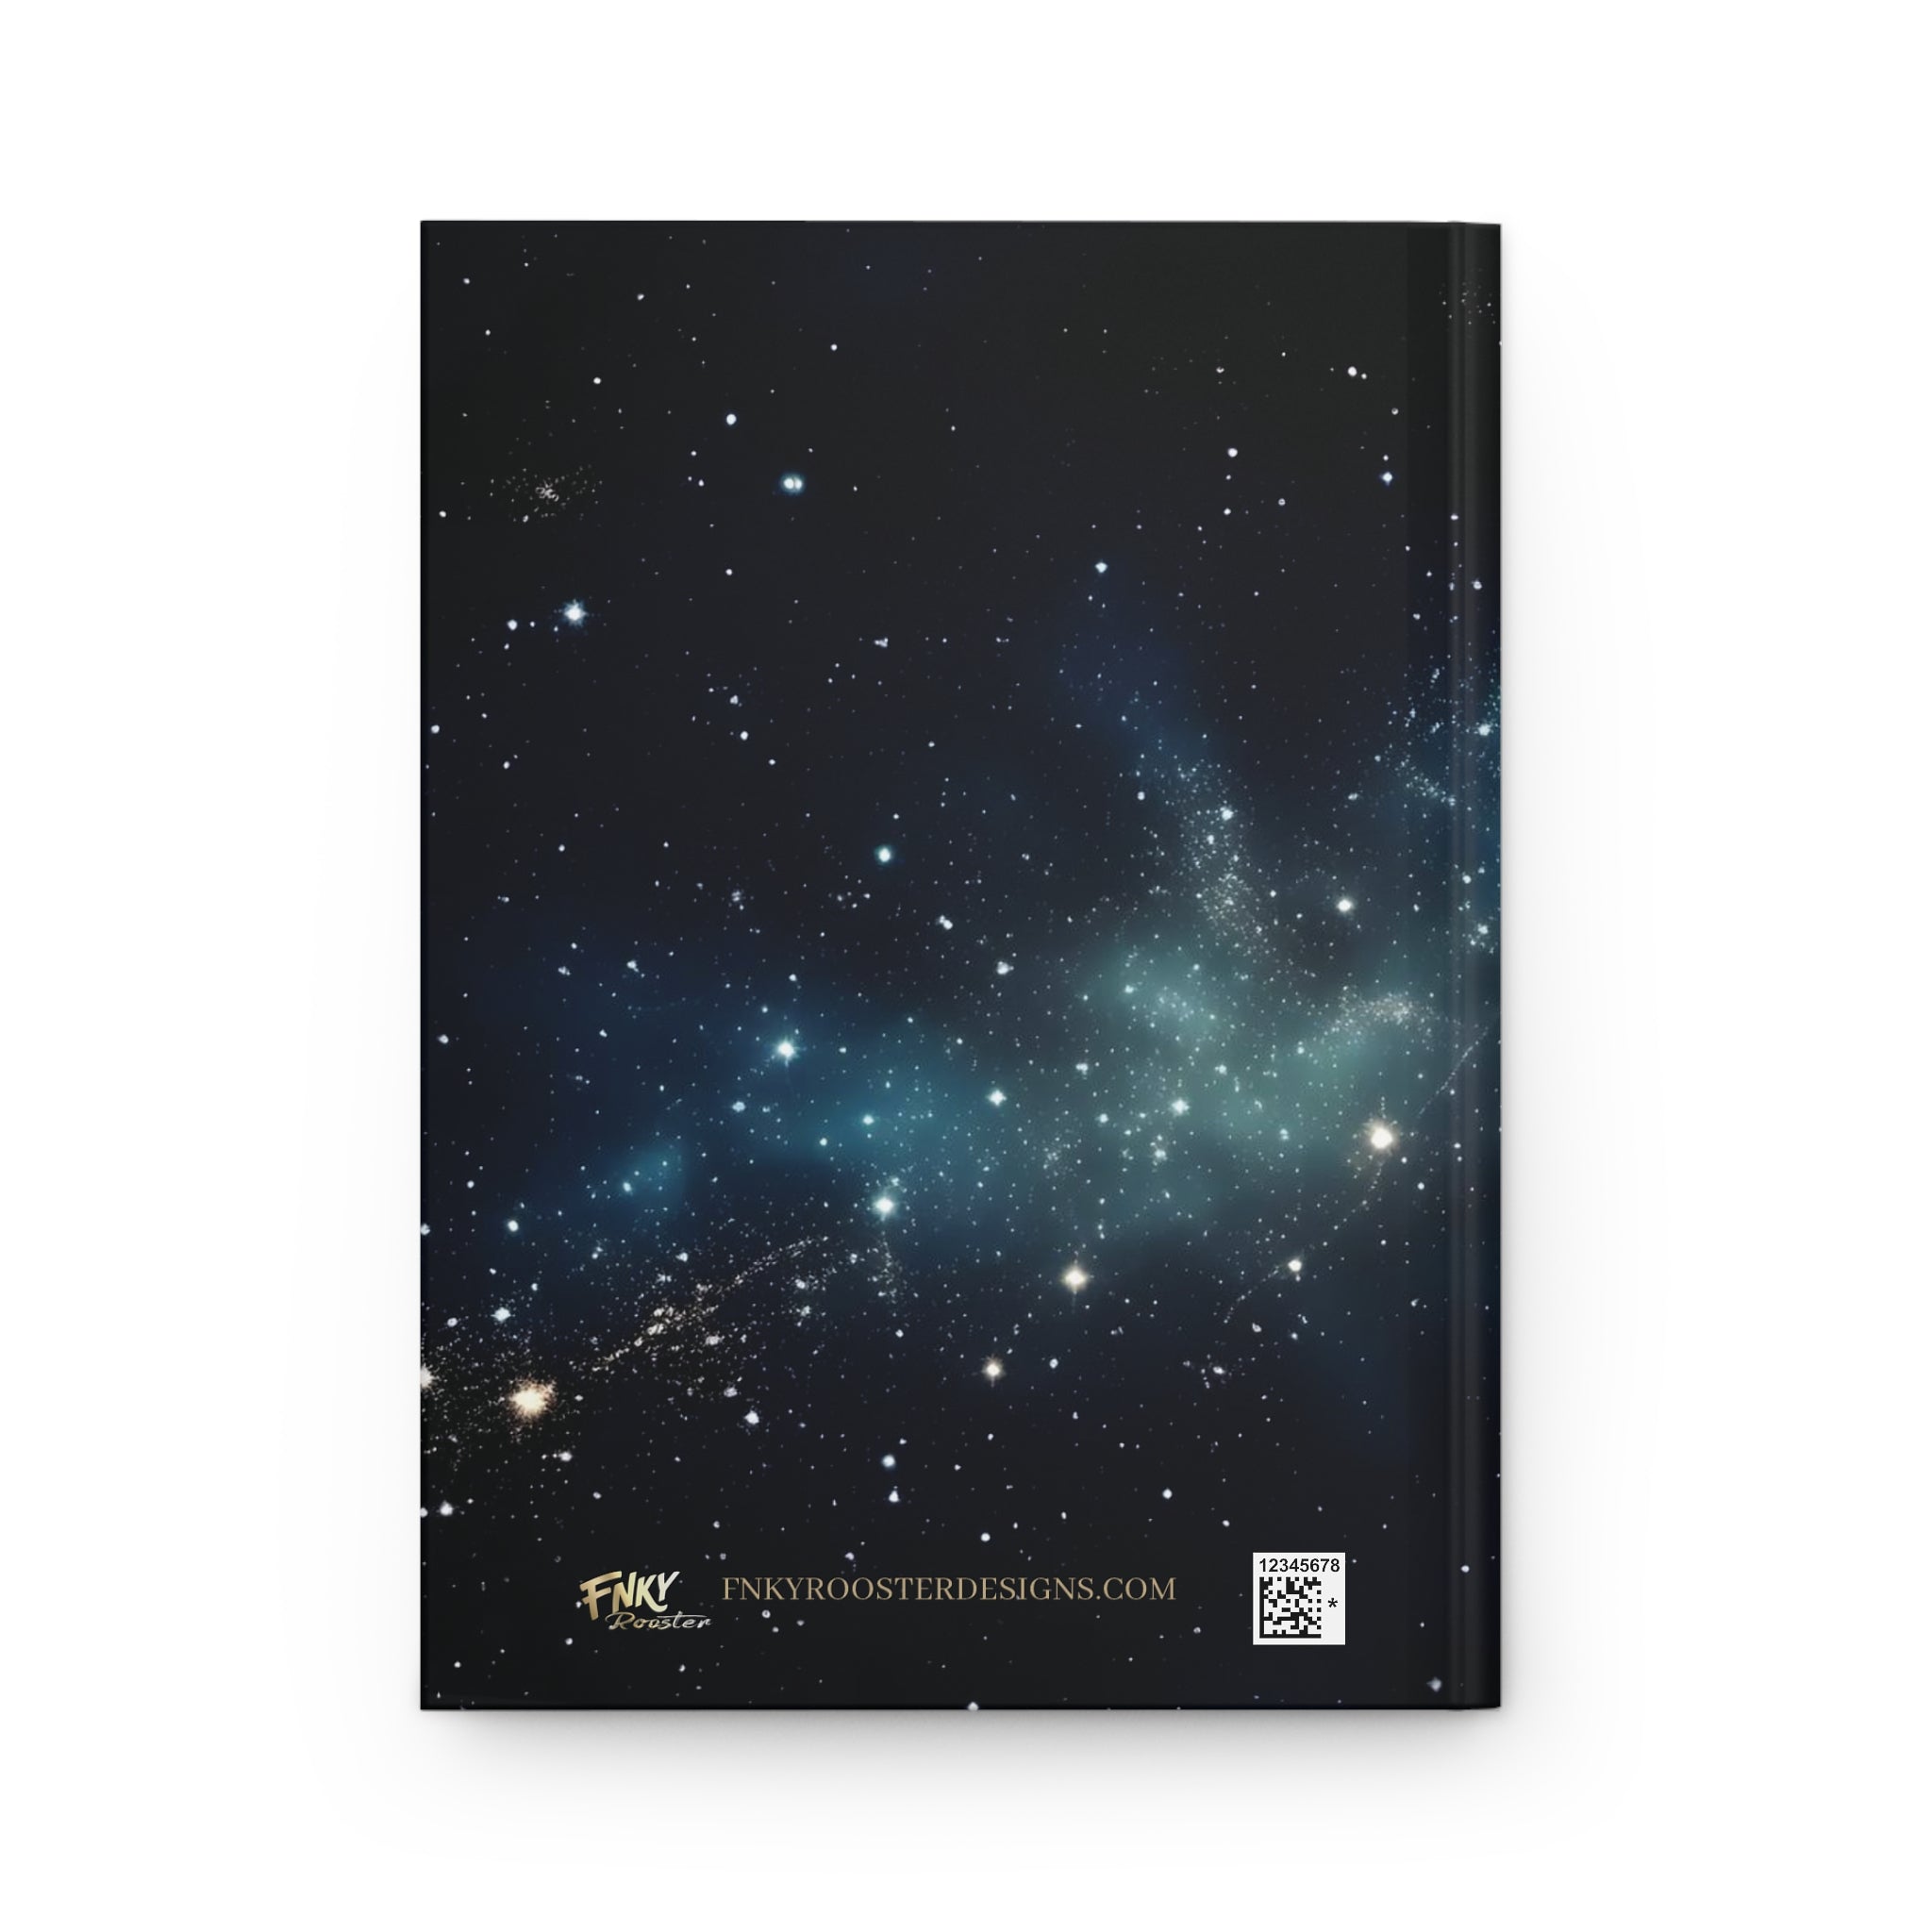 Pisces Horoscope Zodiac Matte Hardcover Journal Rule Lined Pages for the Intuitive Pisces